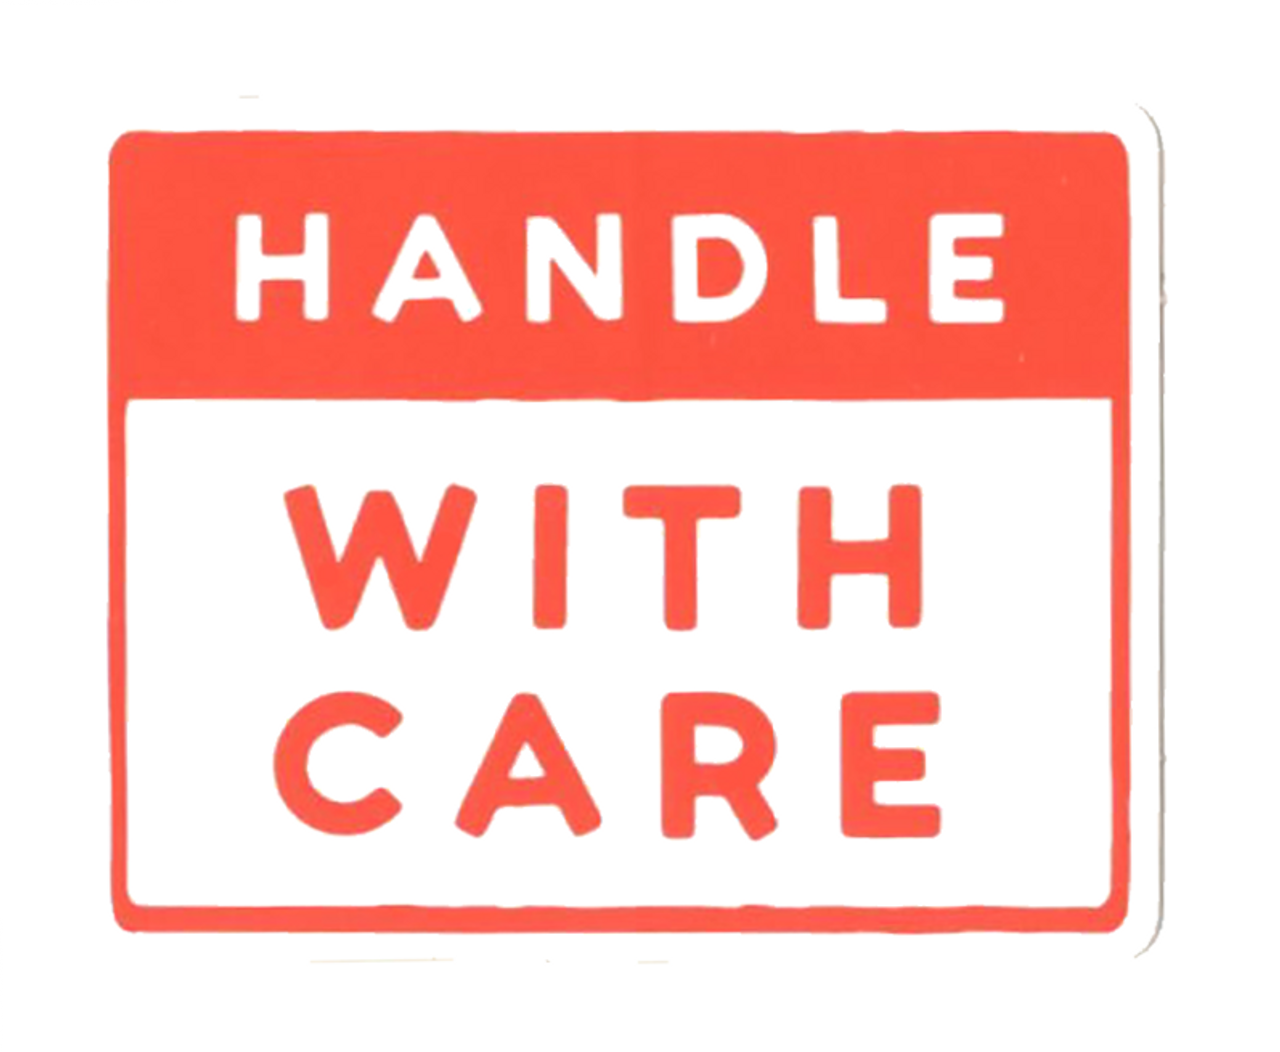 Handle With Care sticker - Power and Light Press Wholesale